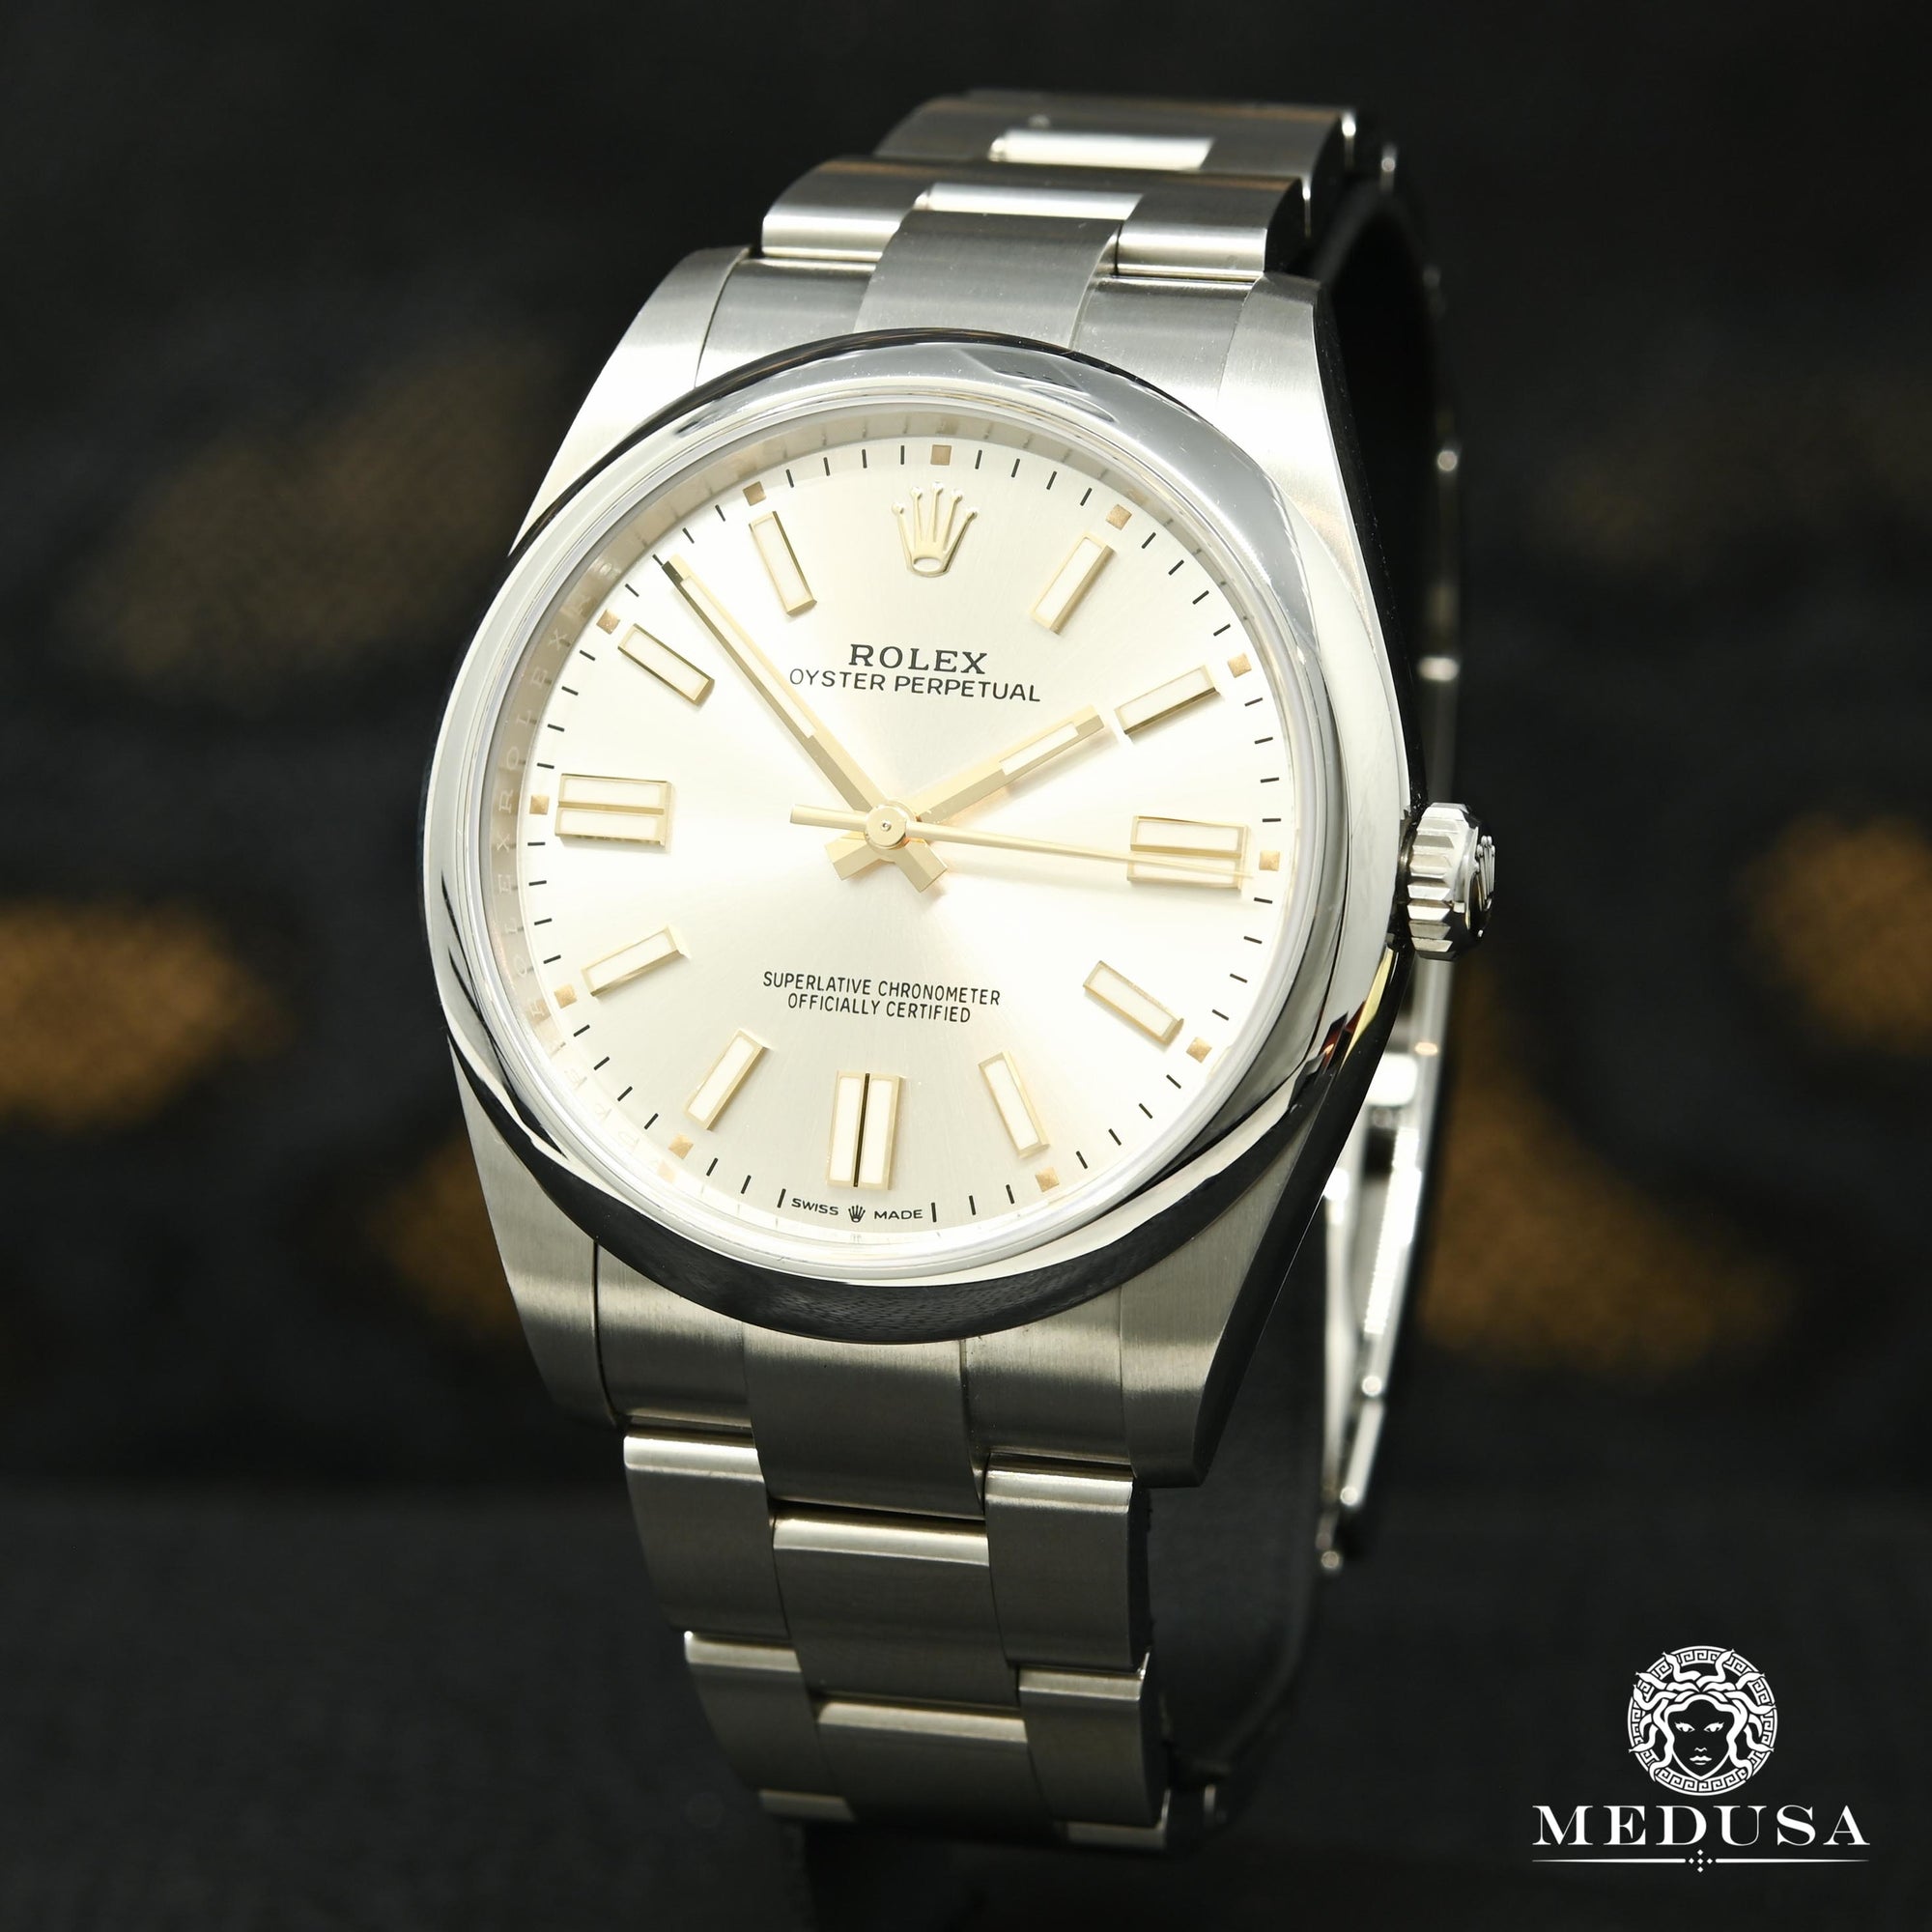 Rolex watch | Rolex Oyster Perpetual 41mm Men's Watch - Silver Stainless